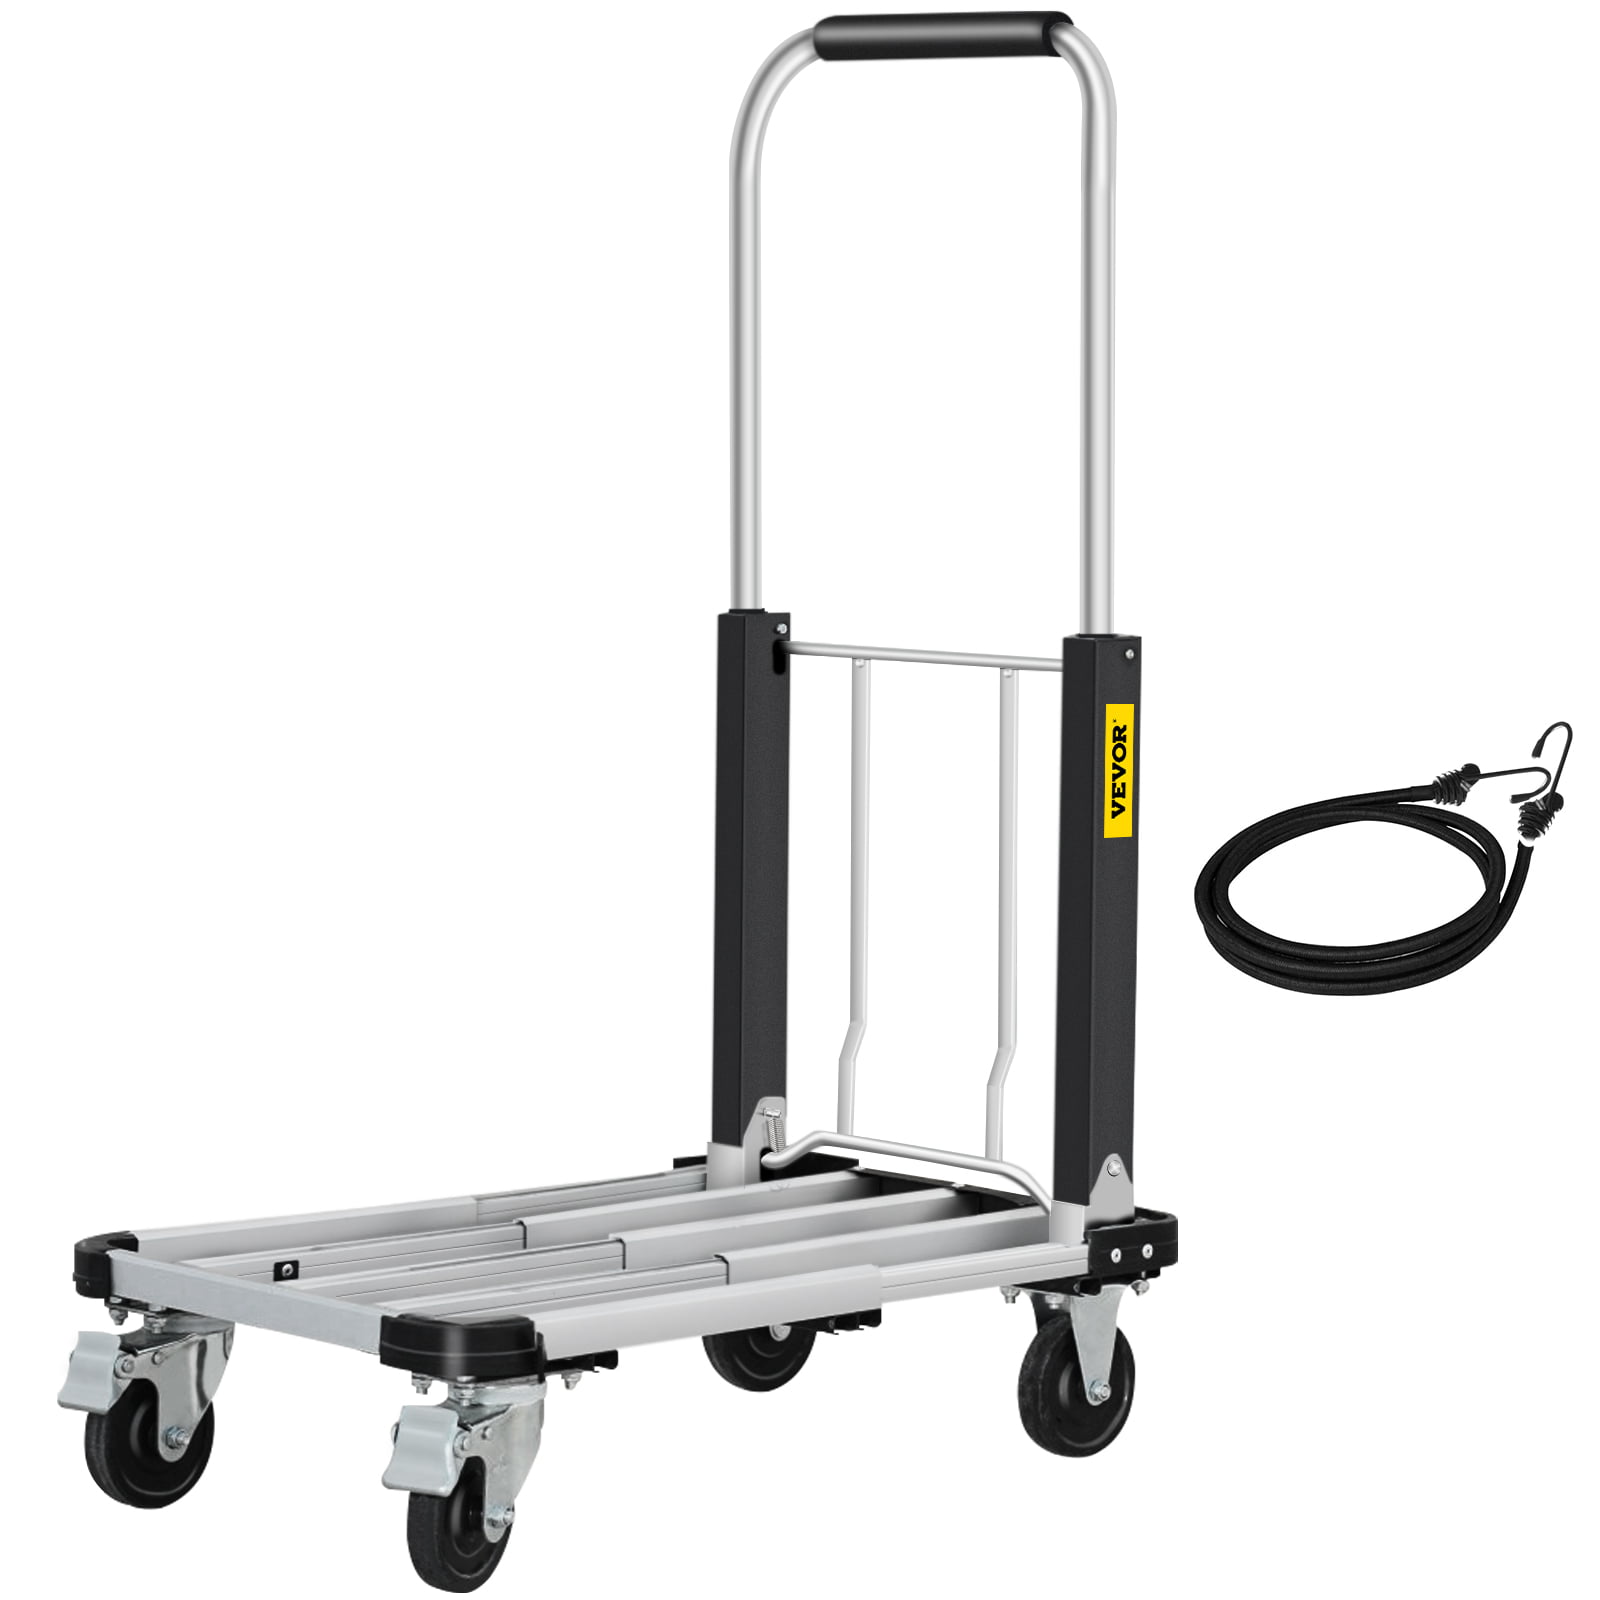 New Enlarged Luggage Cart Folding Dolly Push Truck Hand Trolley 330lbs Capacity 